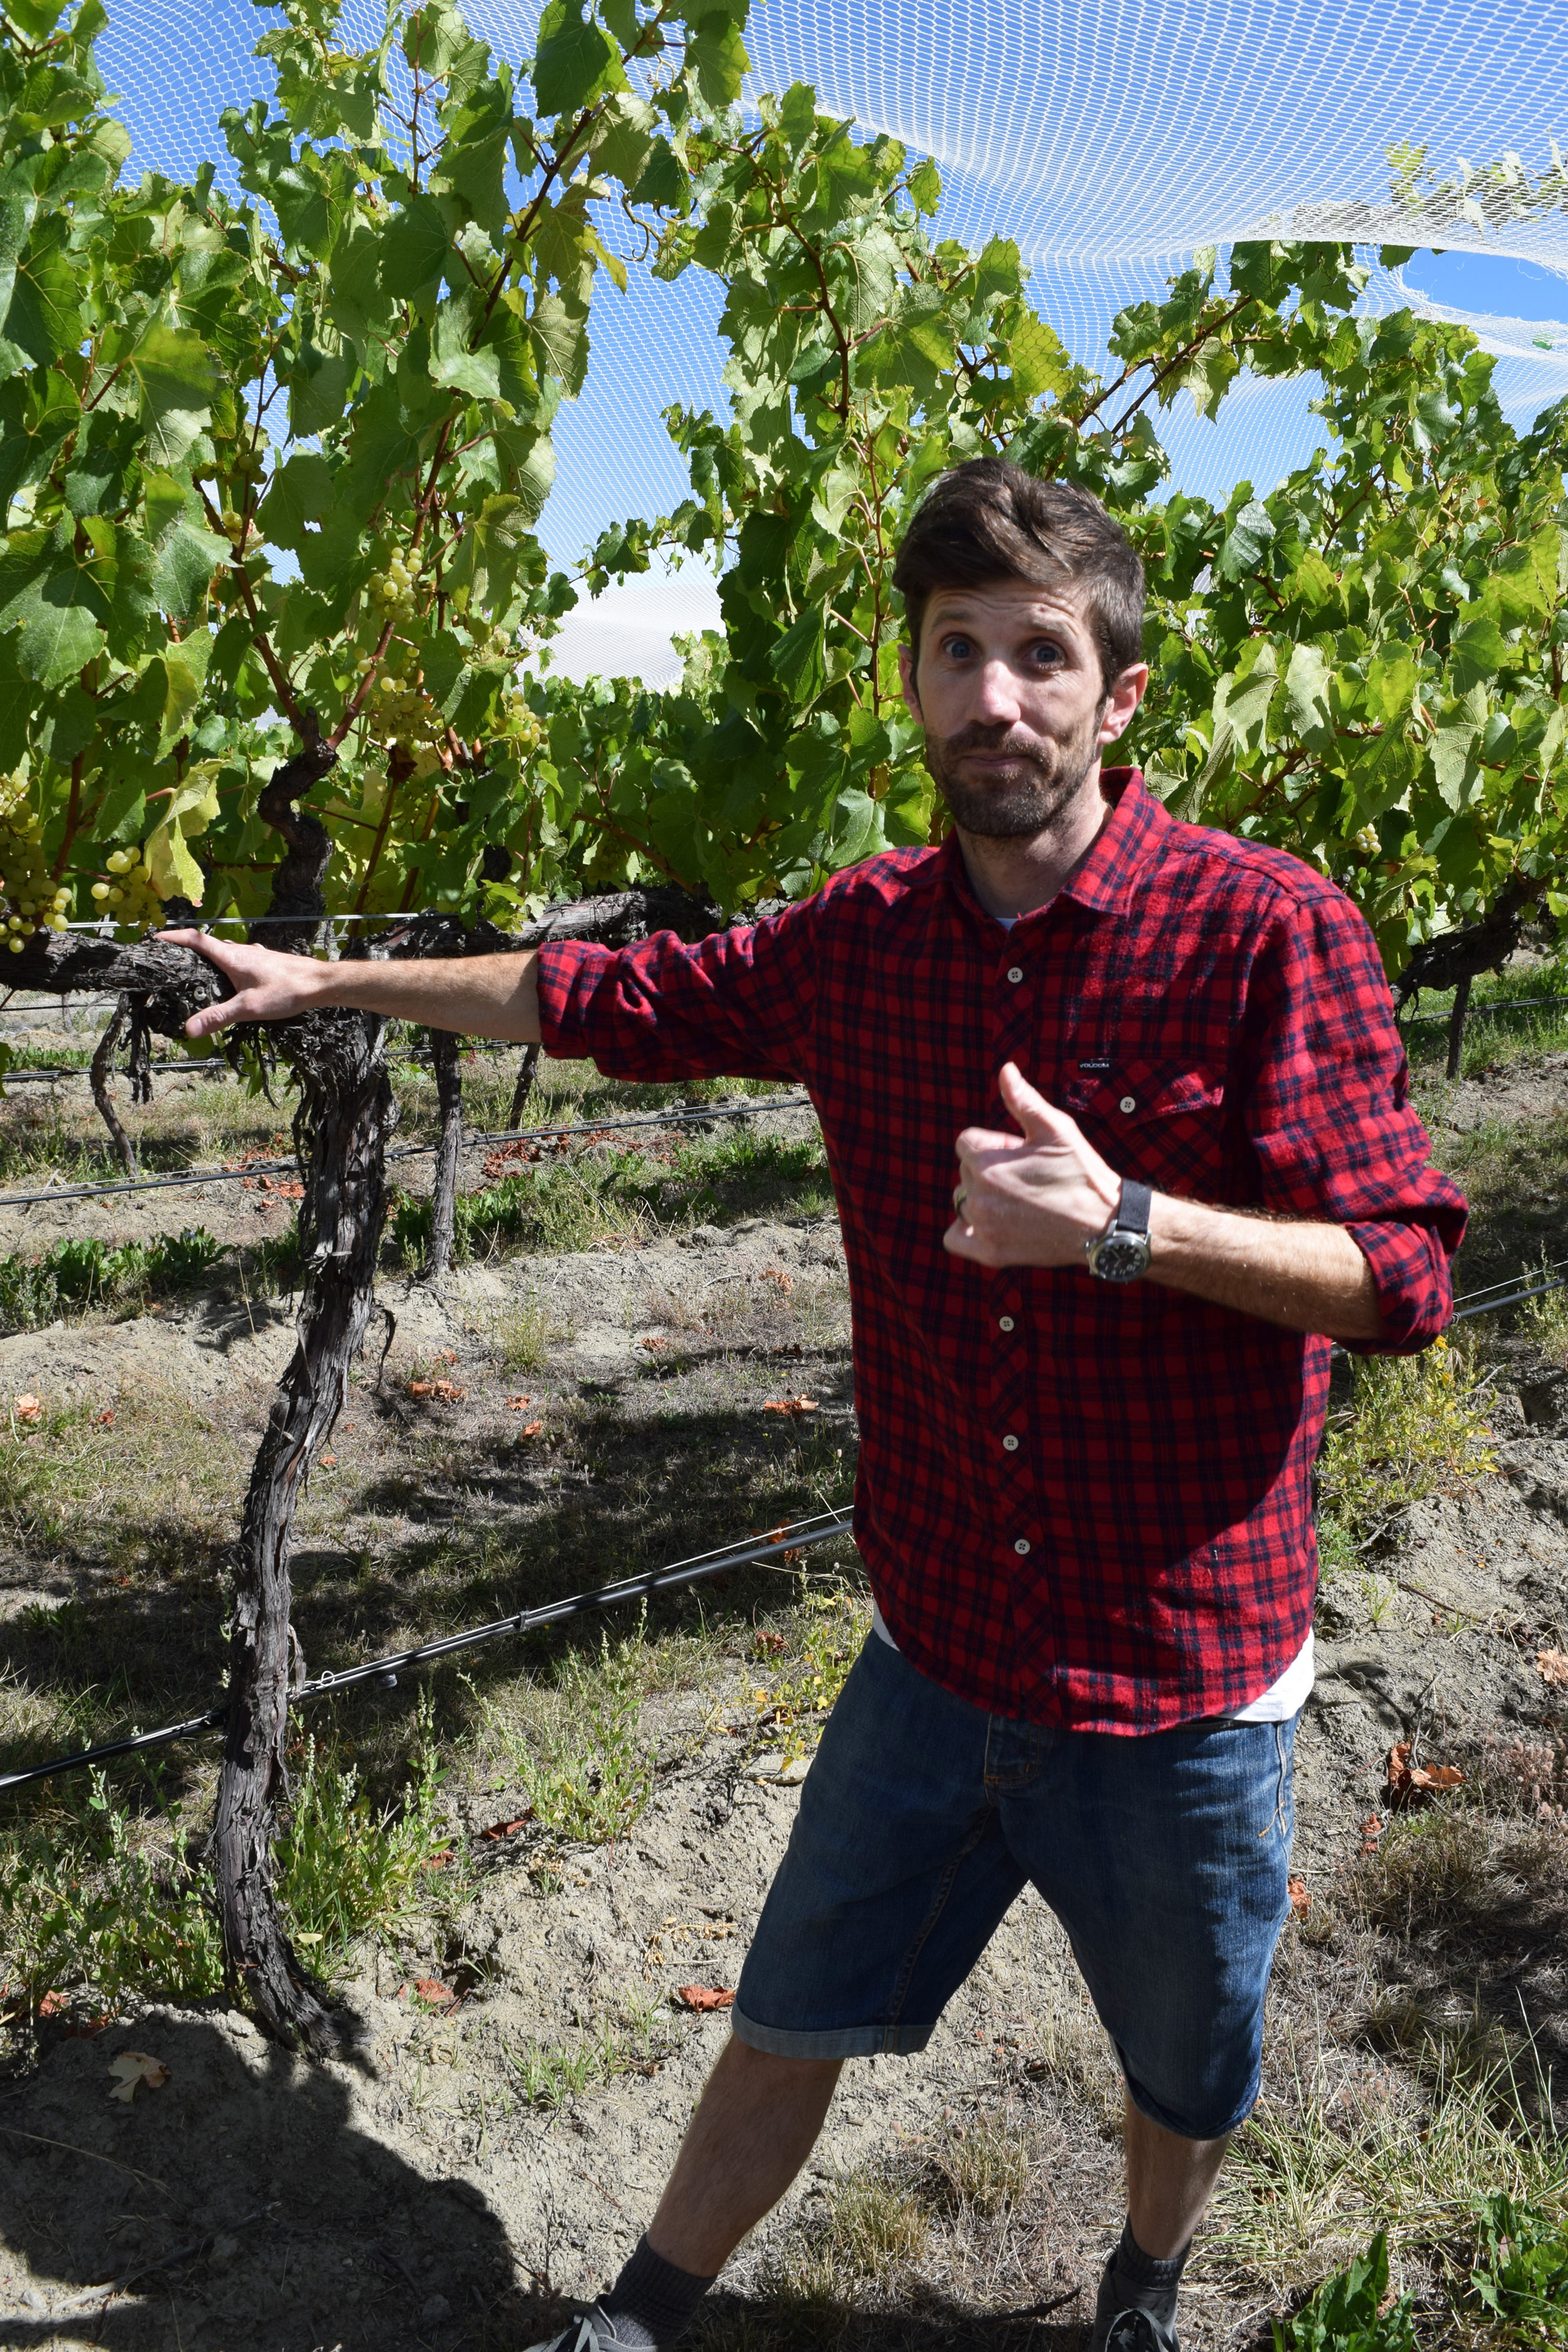 Young winemaker Francis Hutt explains that the many large producers of his country's sauvignon blanc brands "pay for a lot of our research and science and help develop markets," benefitting the whole industry.